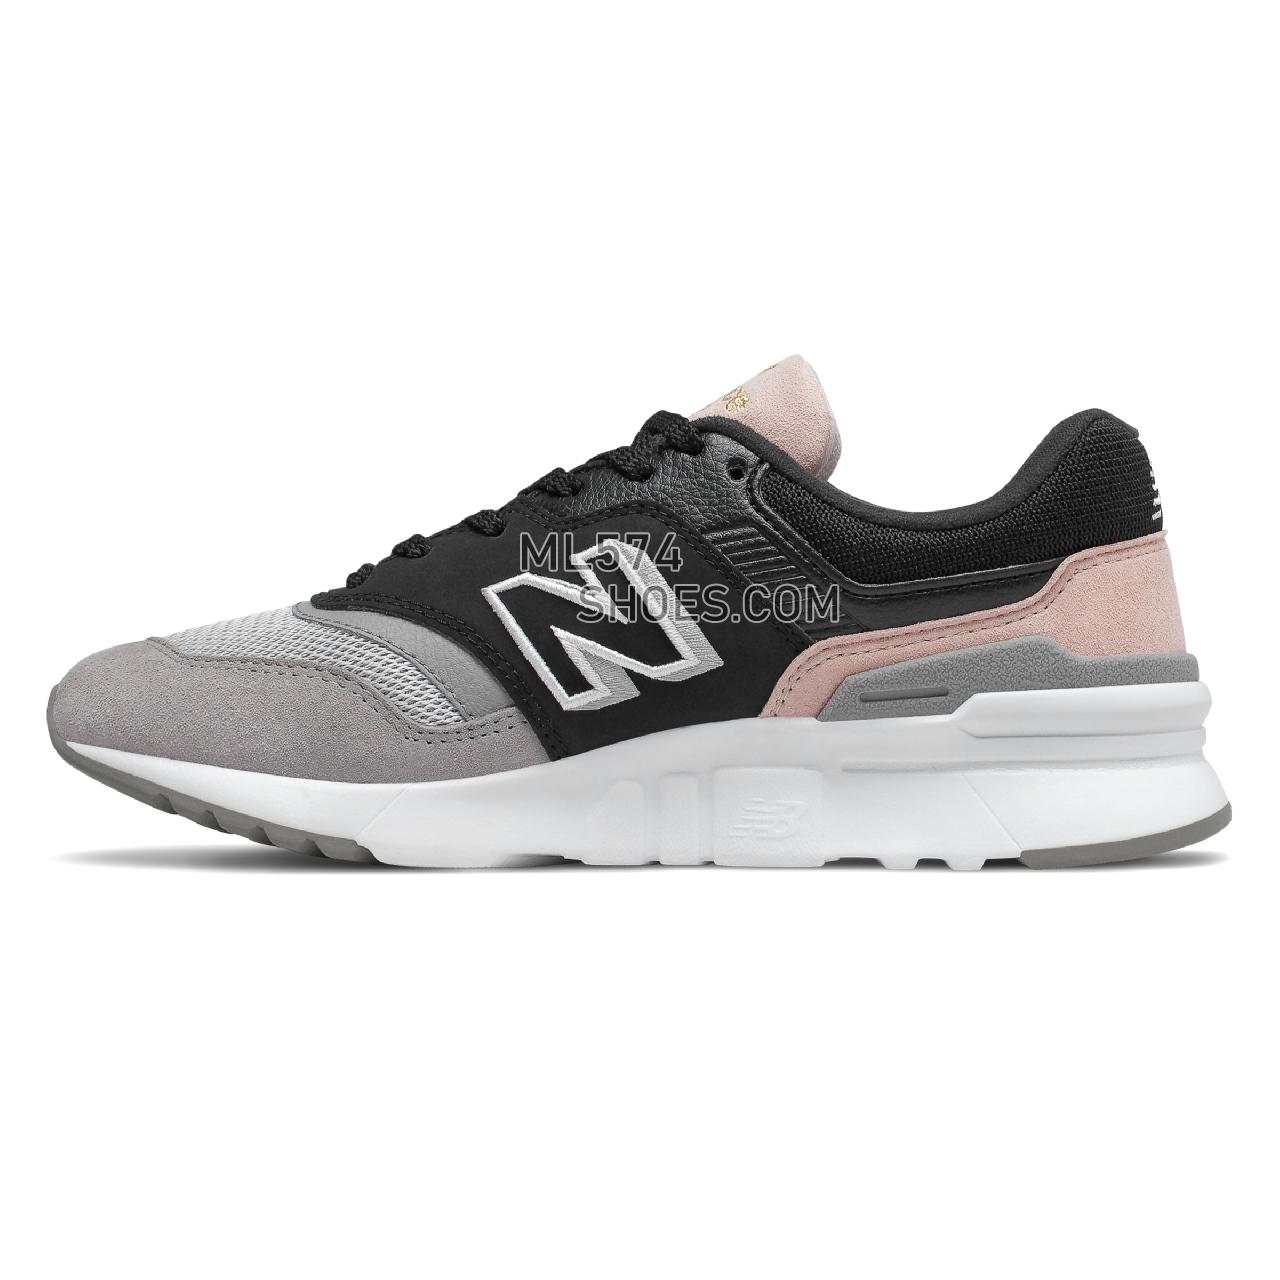 New Balance 997H - Women's Classic Sneakers - Black with Smoked Salt - CW997HAL